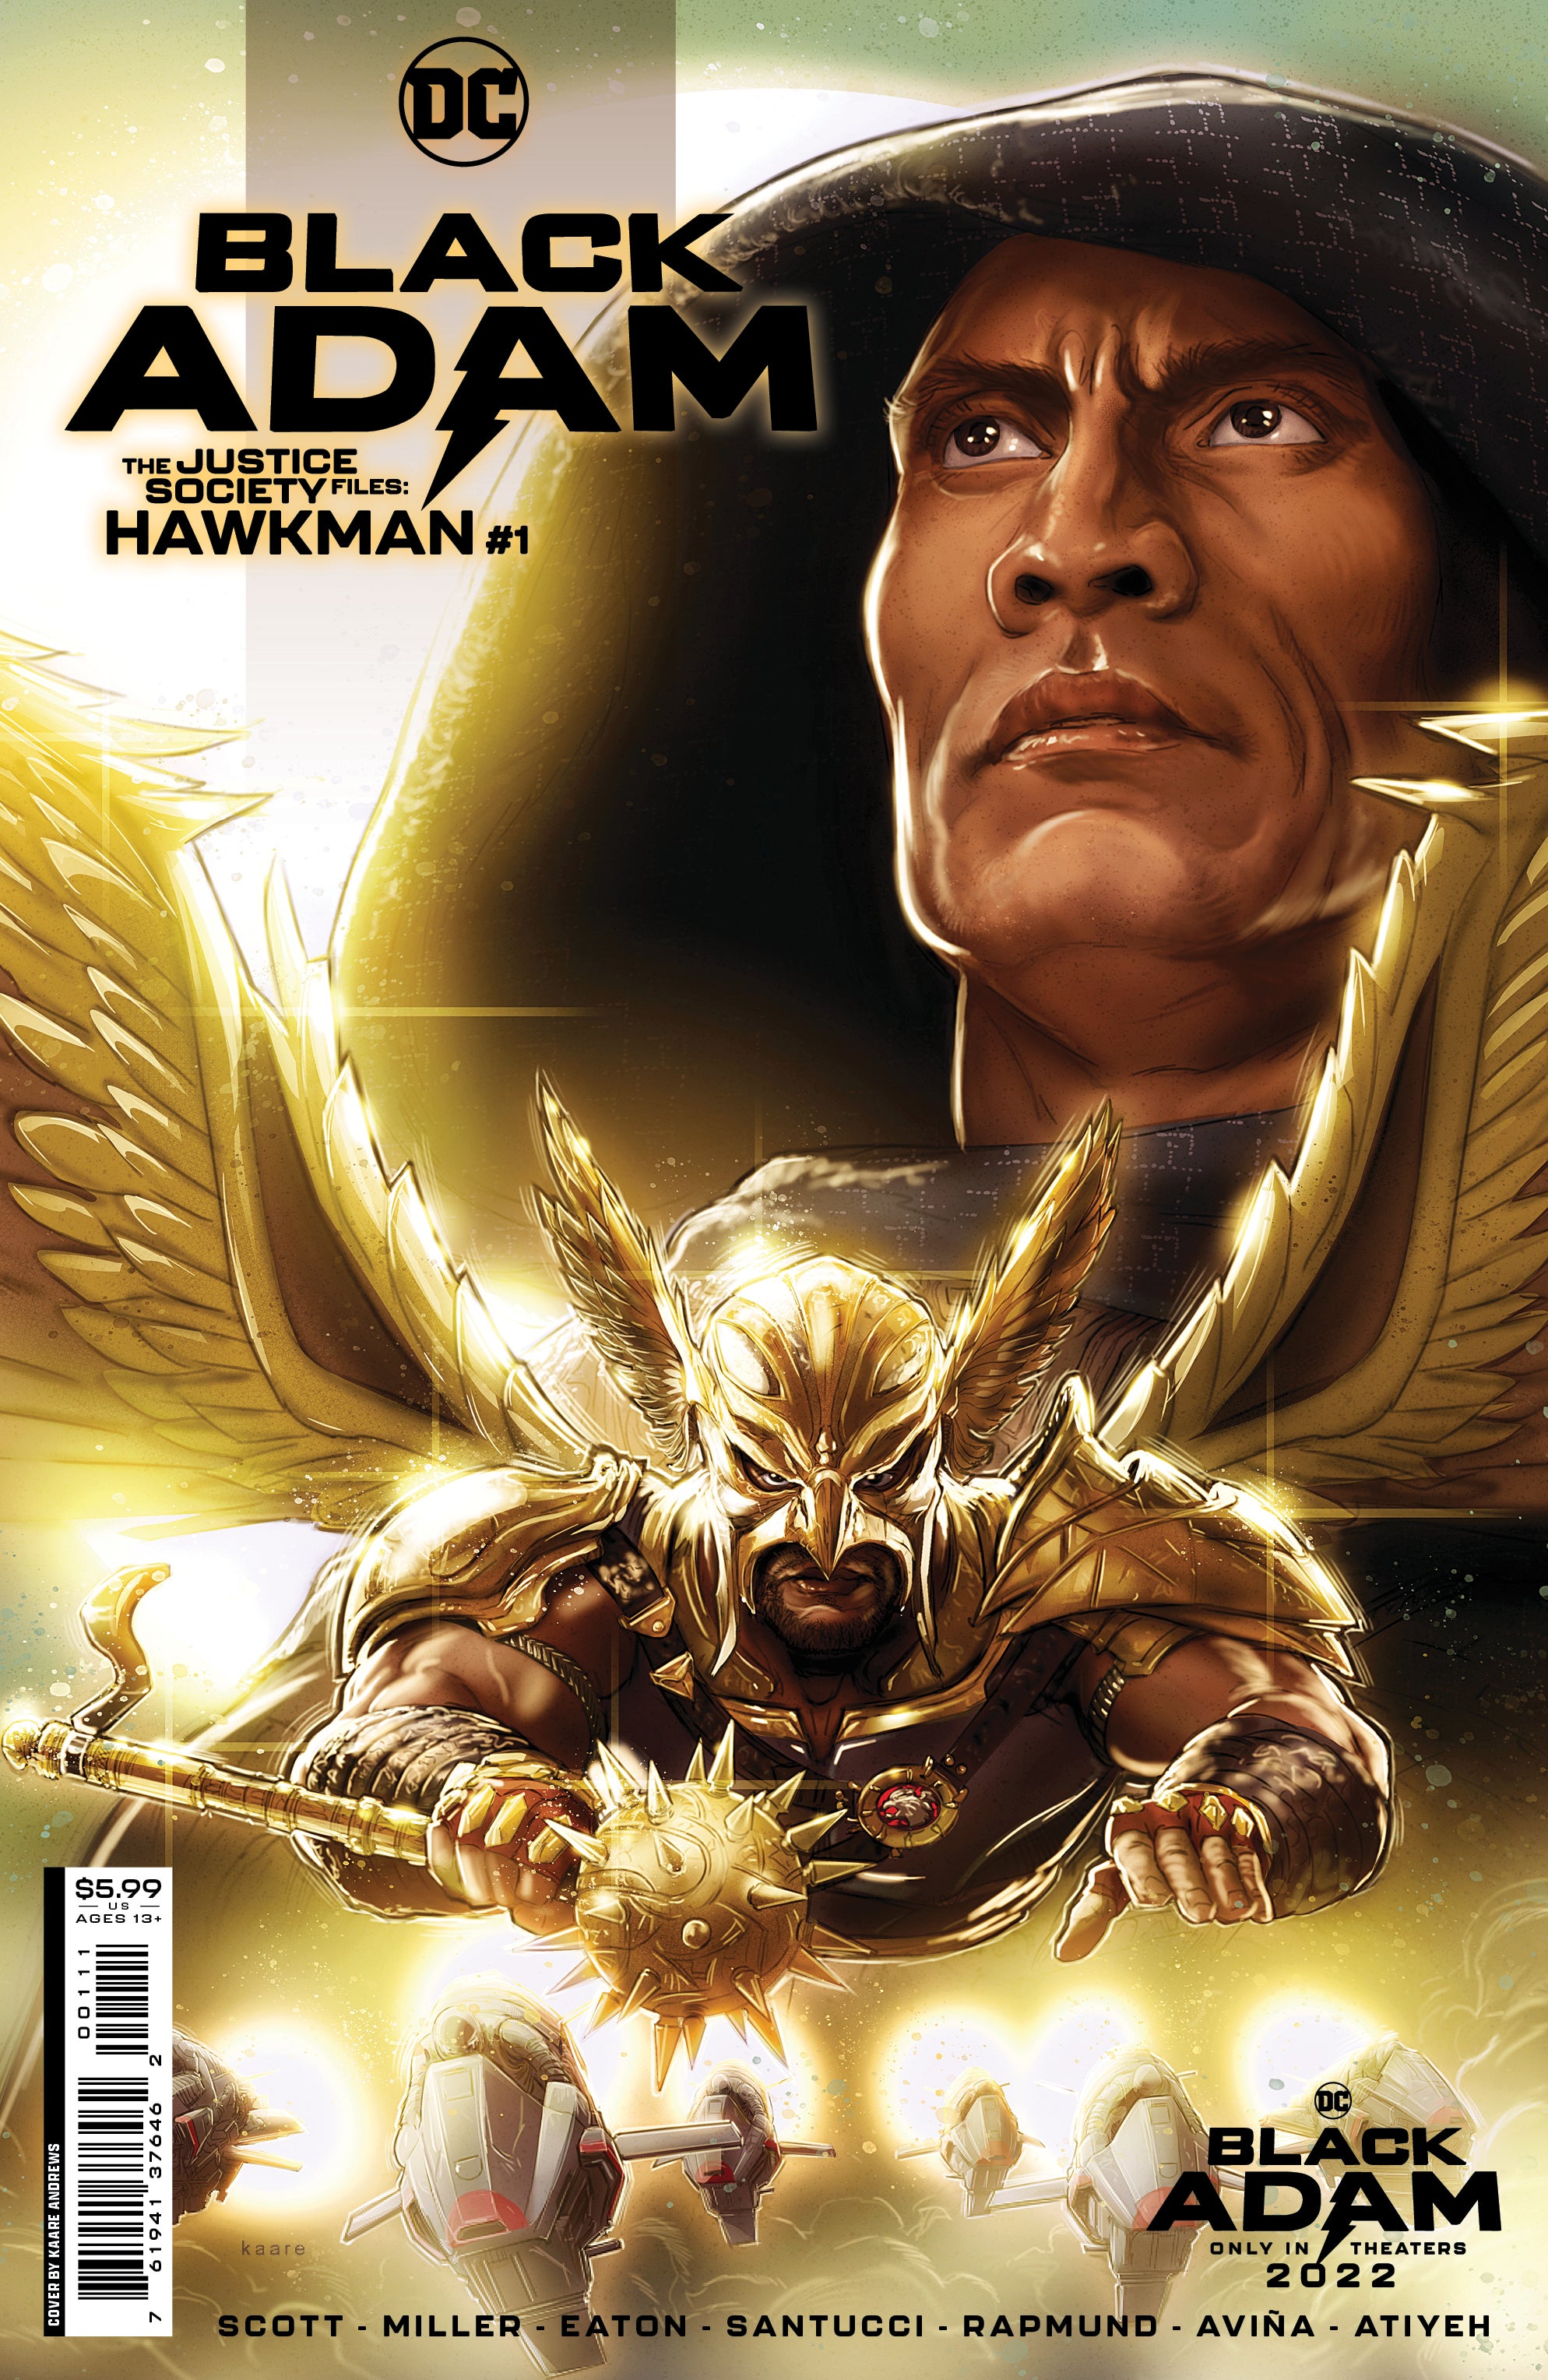 Black Adam – The Justice Society Files cover by Kaare Andrews